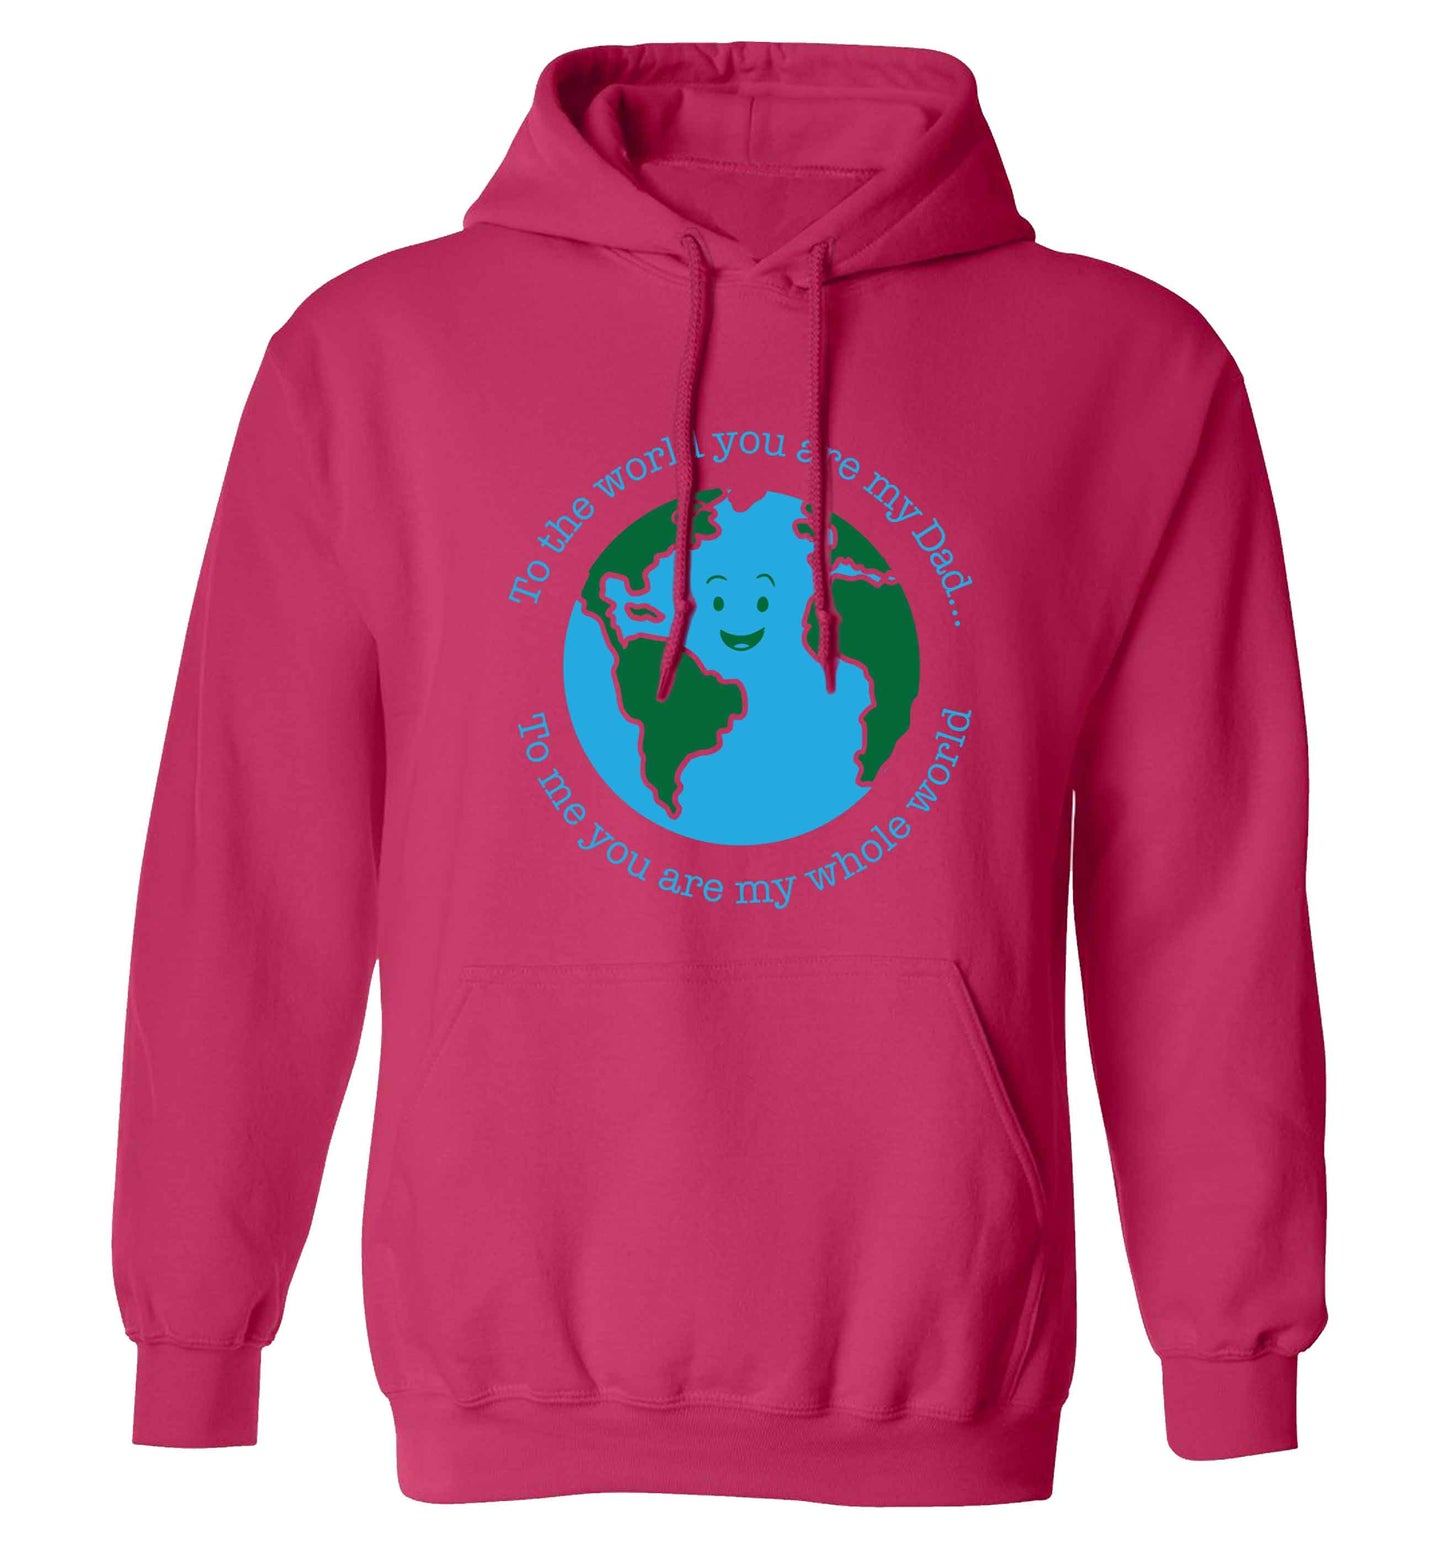 To the world you are my dad, to me you are my whole world adults unisex pink hoodie 2XL